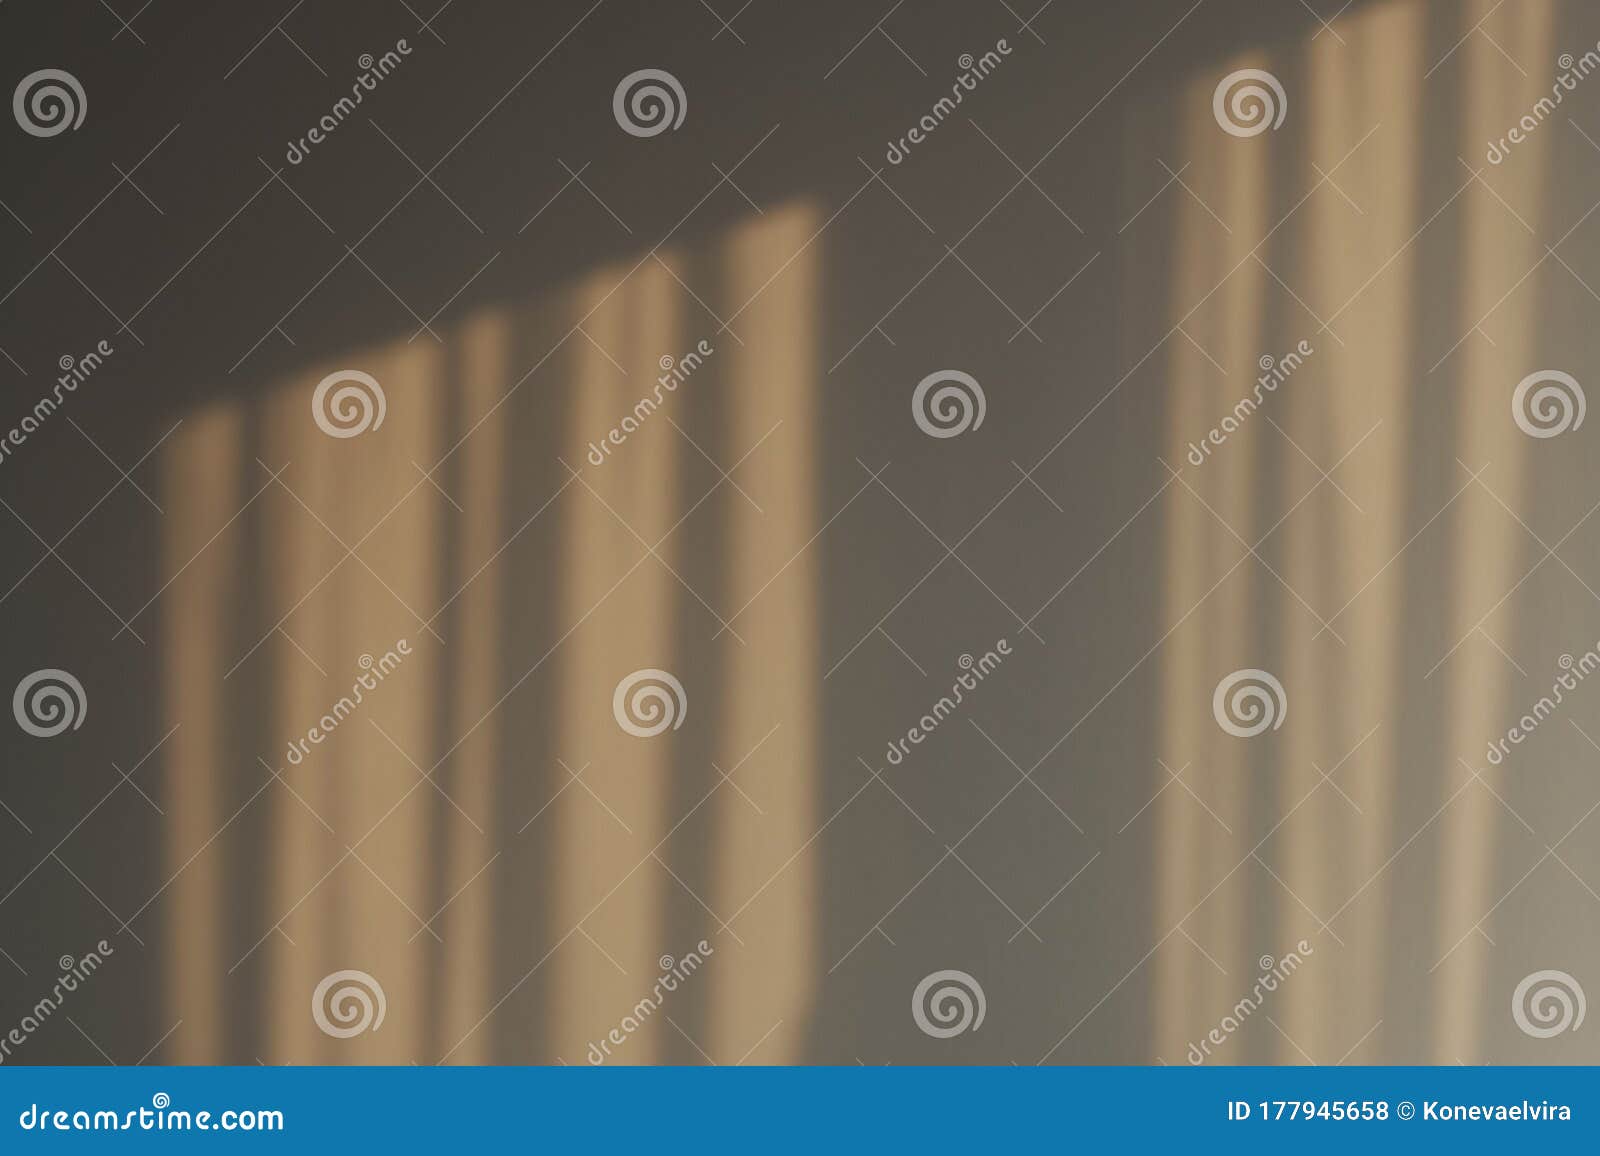 Industrial Design Window Sunlight Parallel Lines Shadows. Light and ...